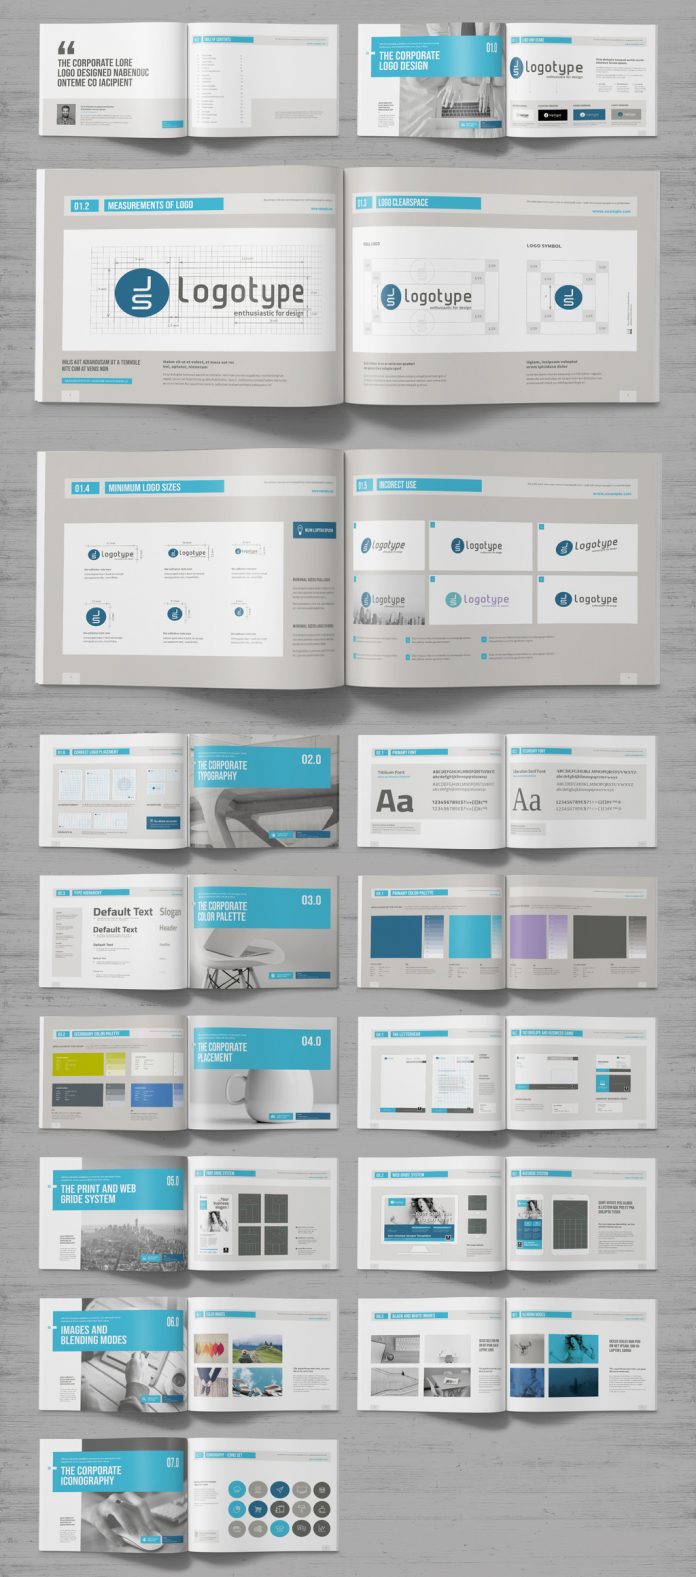 Adobe InDesign brand manual template with blue accents from MrTemplater.